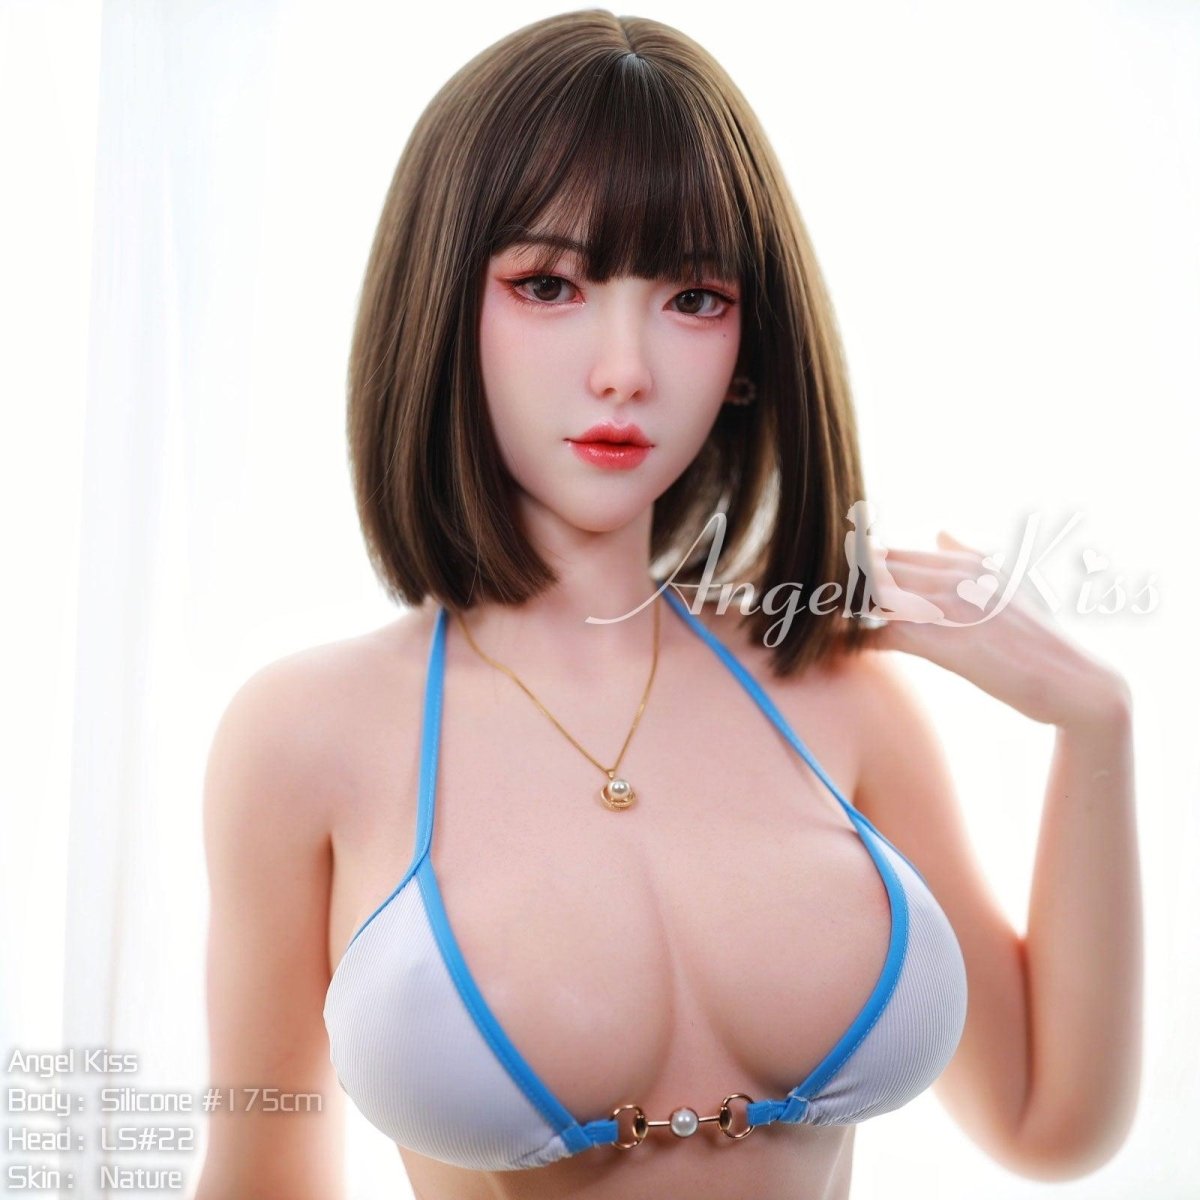 Angel Kiss | 175cm D-Cup Silicone Asian Sex Doll - Angel - SuperLoveDoll